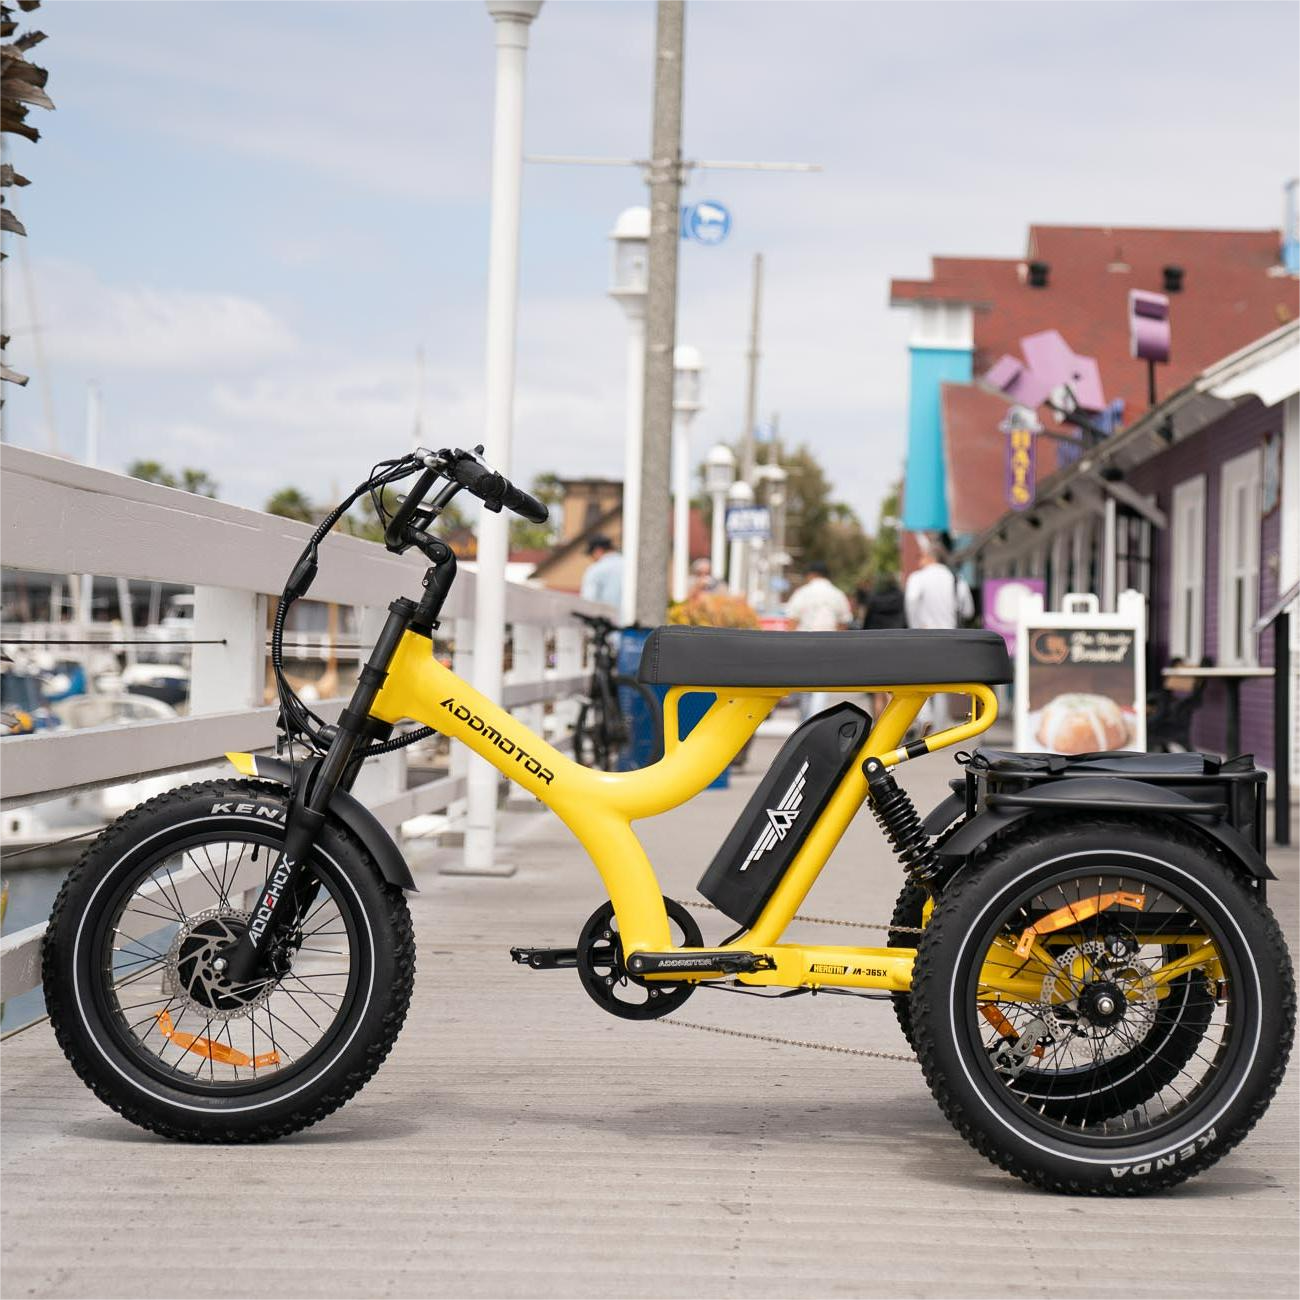 The Addmotor M-365x Electric Tricycle: A Unique Blend of Comfort, Performance, and Style